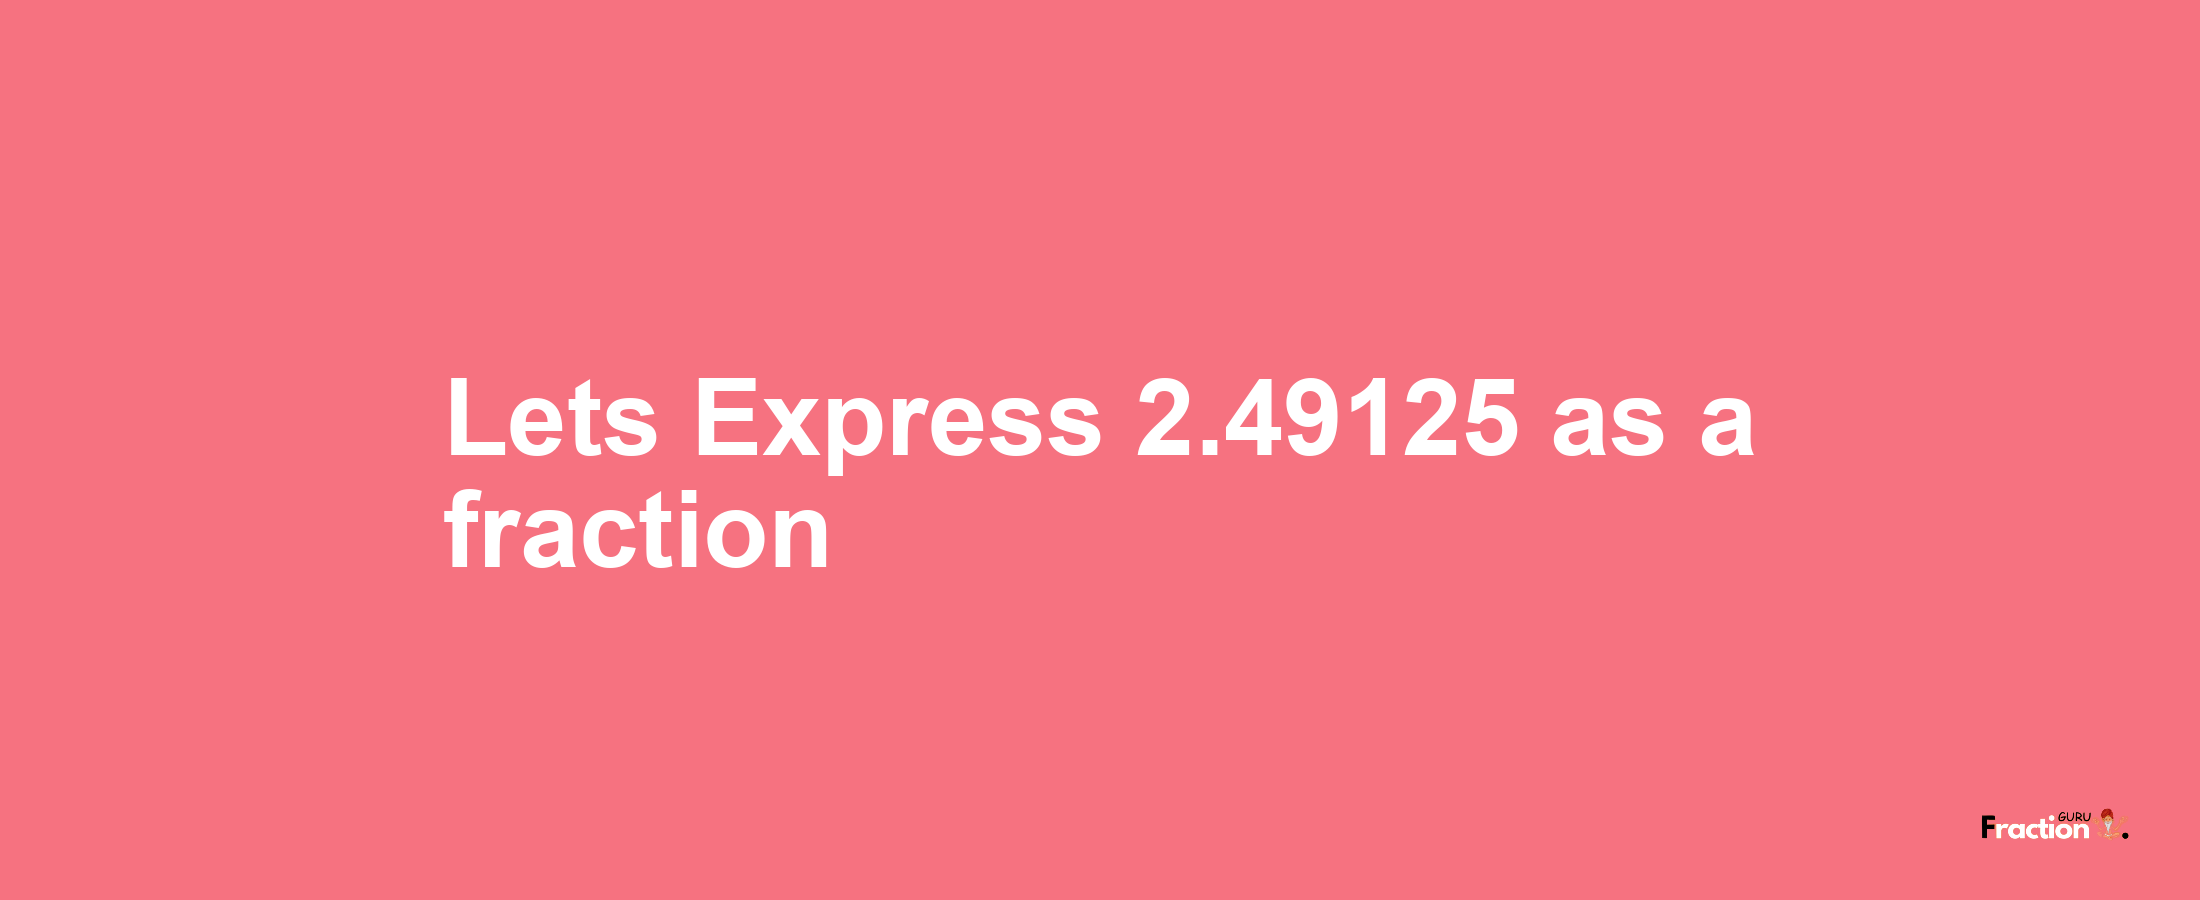 Lets Express 2.49125 as afraction